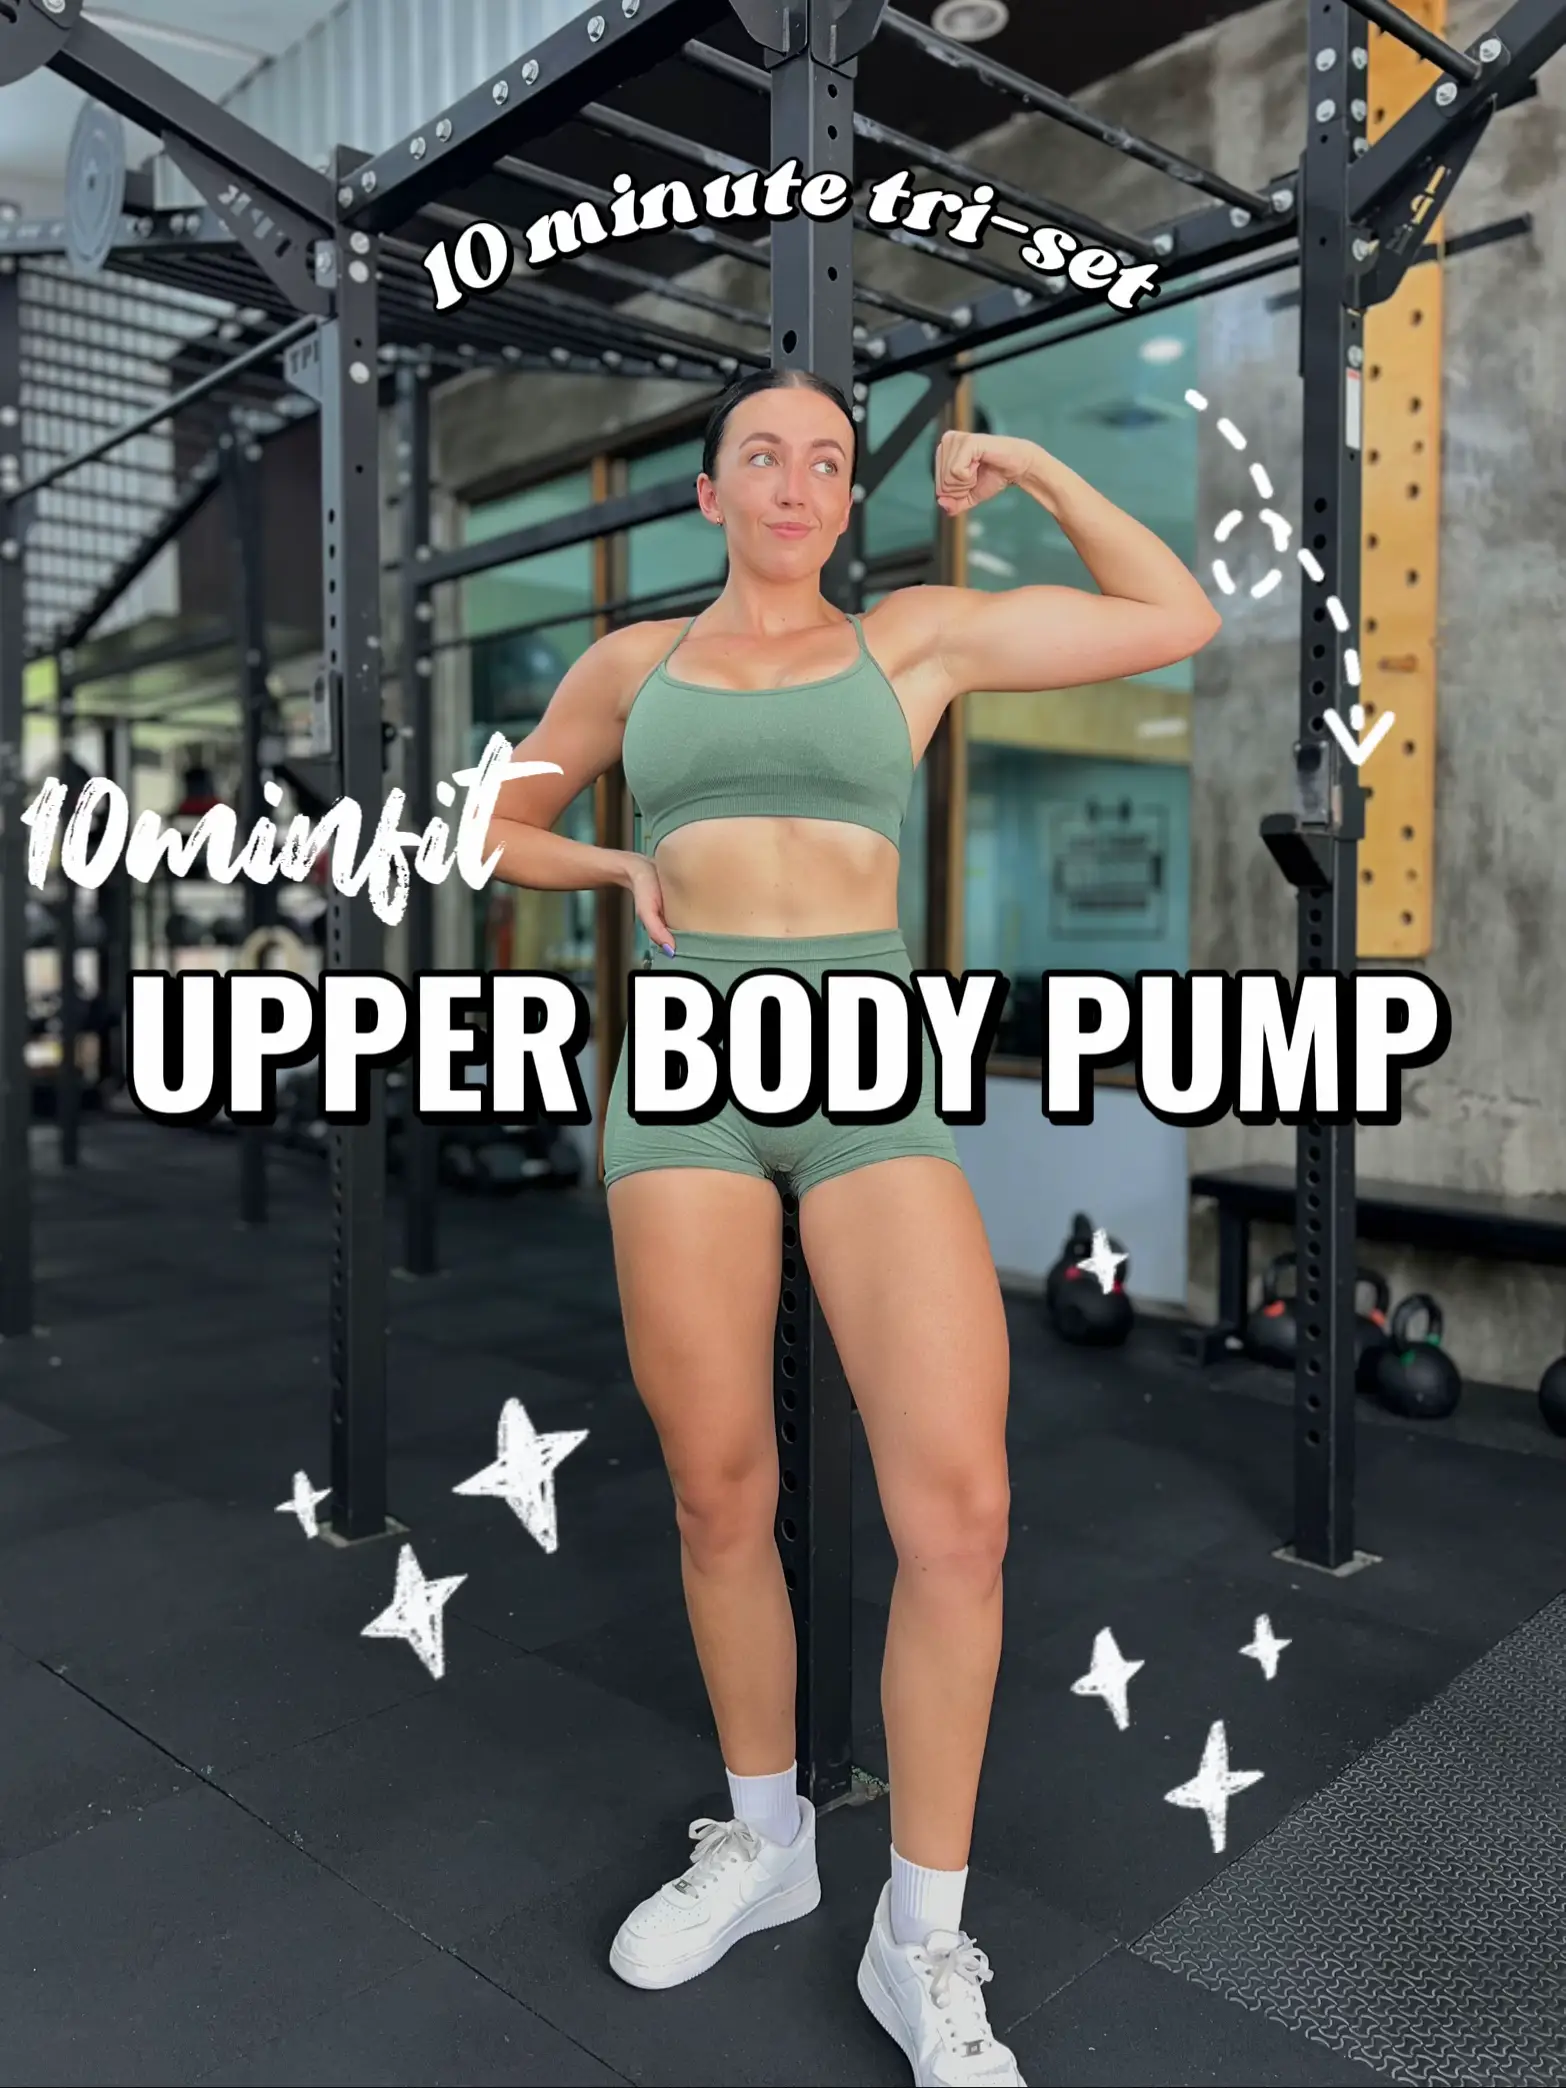 10 Minute Upper Body Workout for Runners